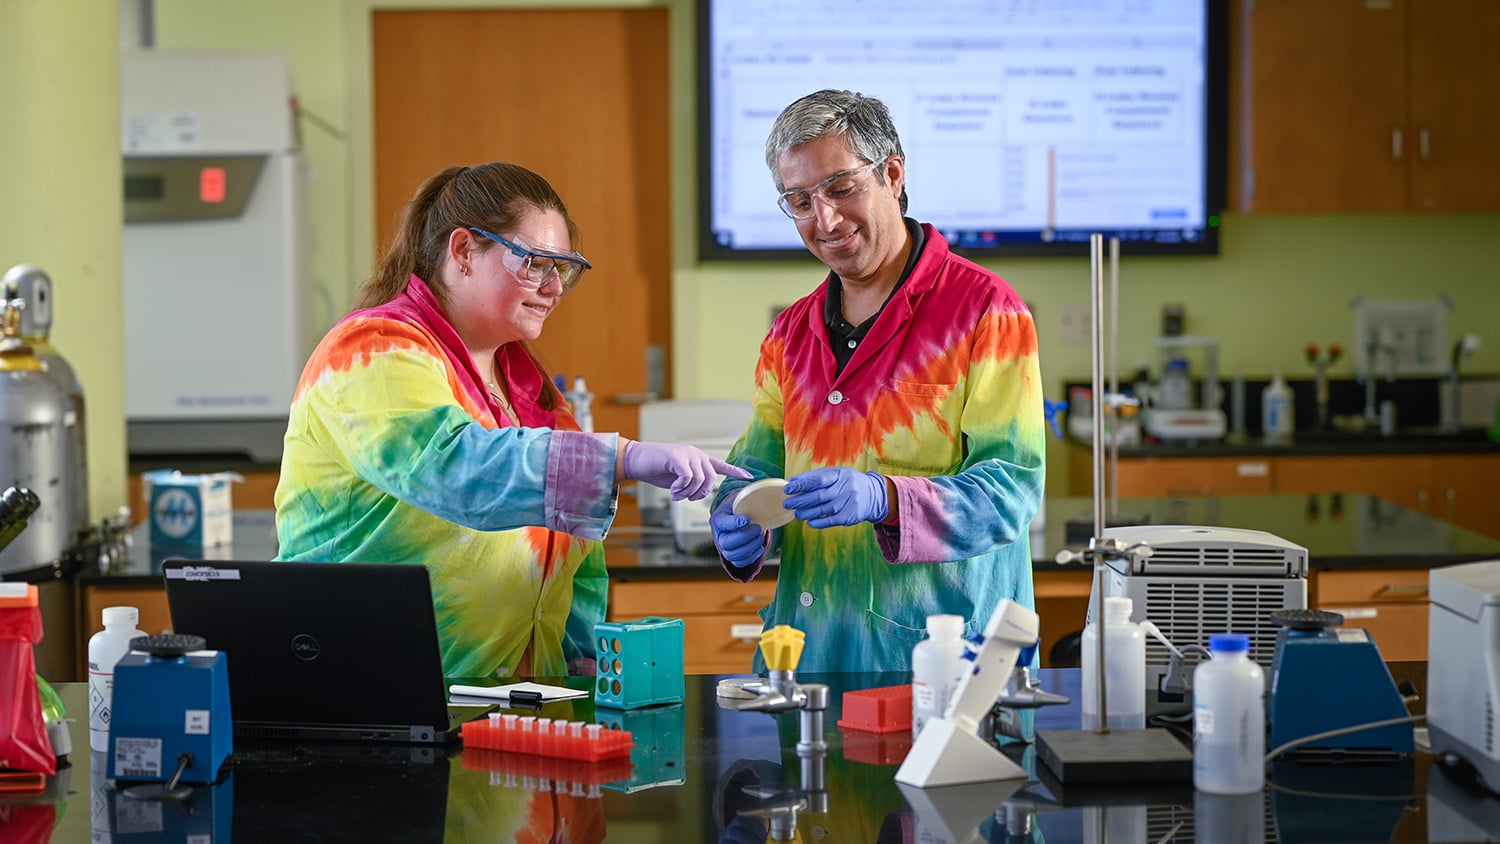 Carlos Goller, associate teaching professor in the Department of Biological Sciences, and Madison Routh, a post-baccalaureate researcher, observe the growth of solid media on Comamonas testosteroni, an organism with bioremediation potential.